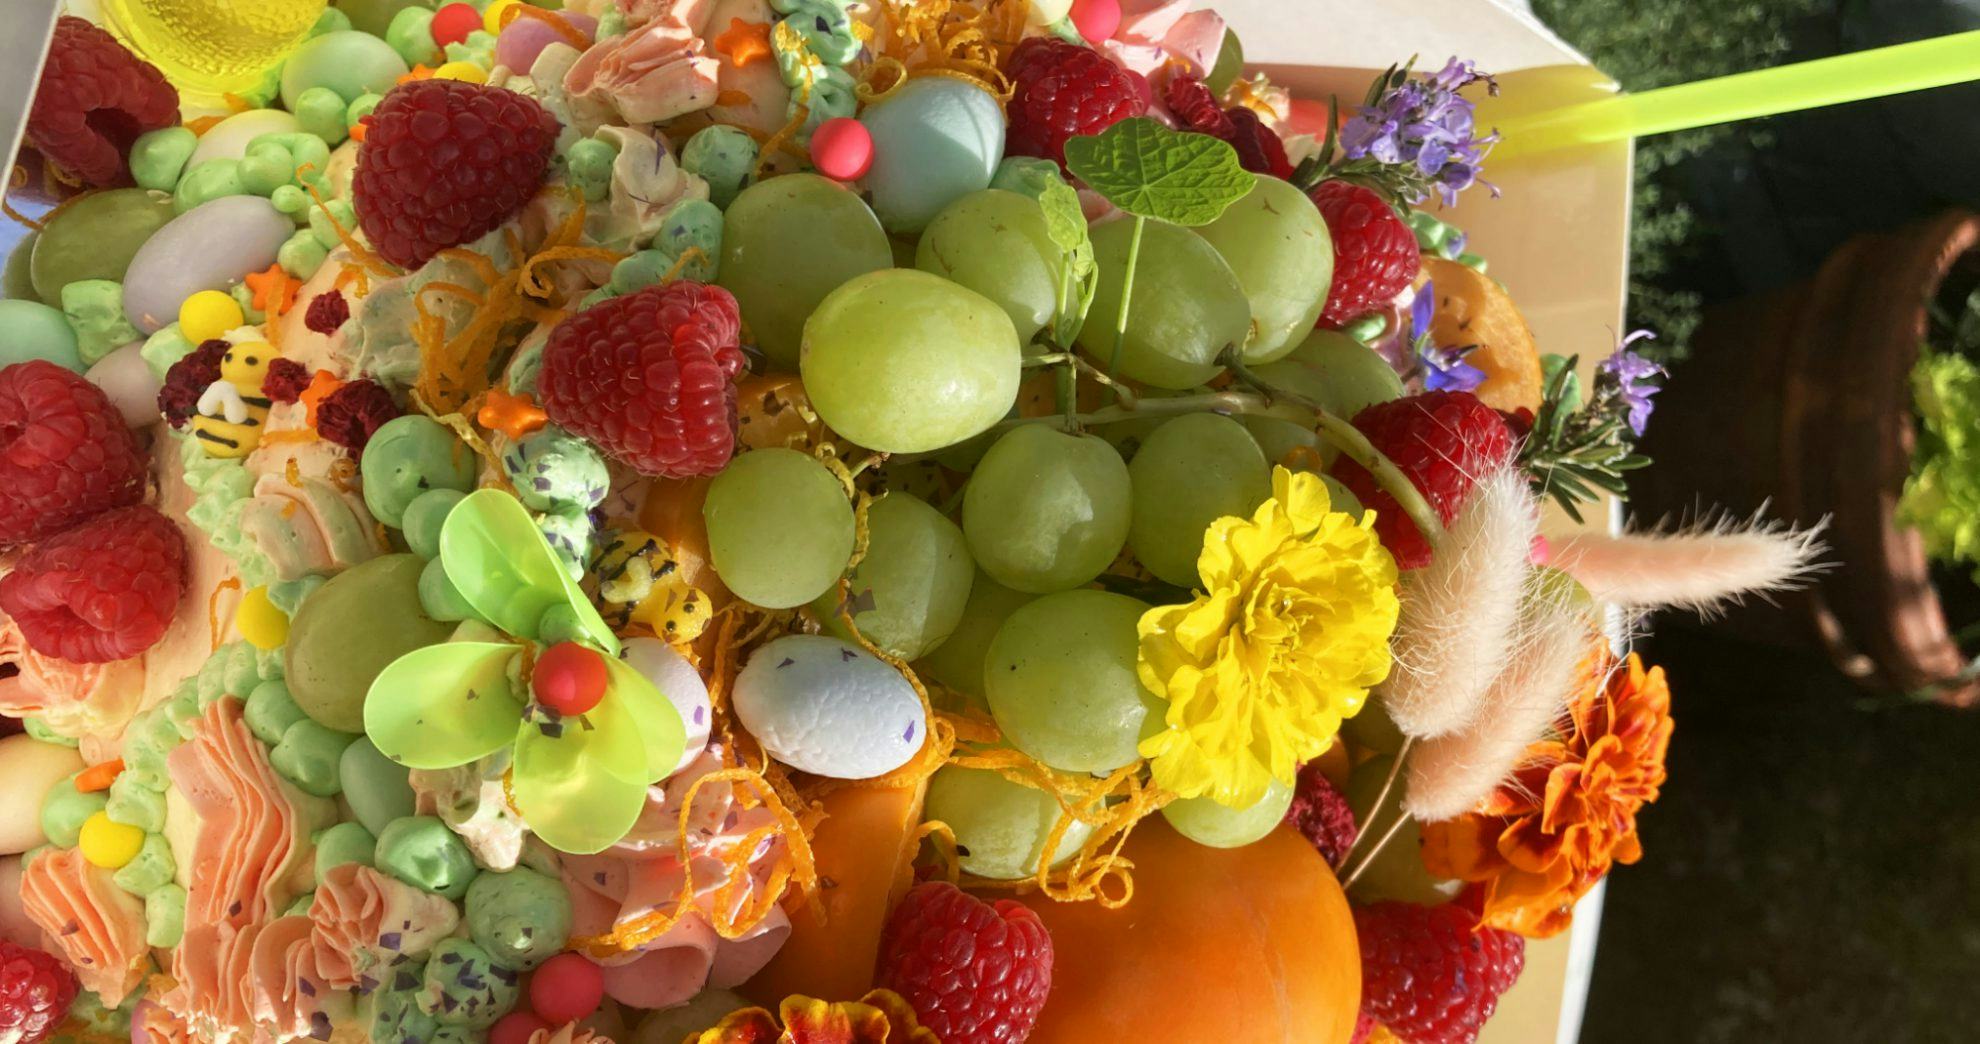 A cake close-up piled with peach and pale green icing, candy bumblebees and stars, grapes, raspberries, eggs, orange zest and flowers